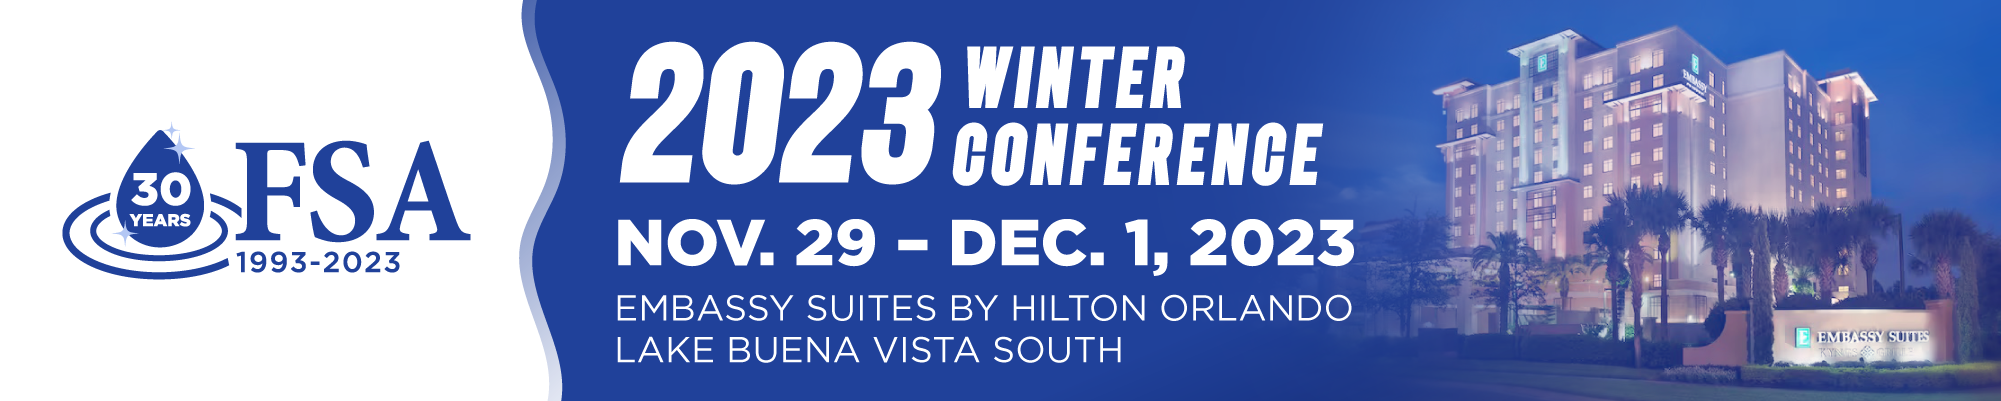 Winter Conference 2023